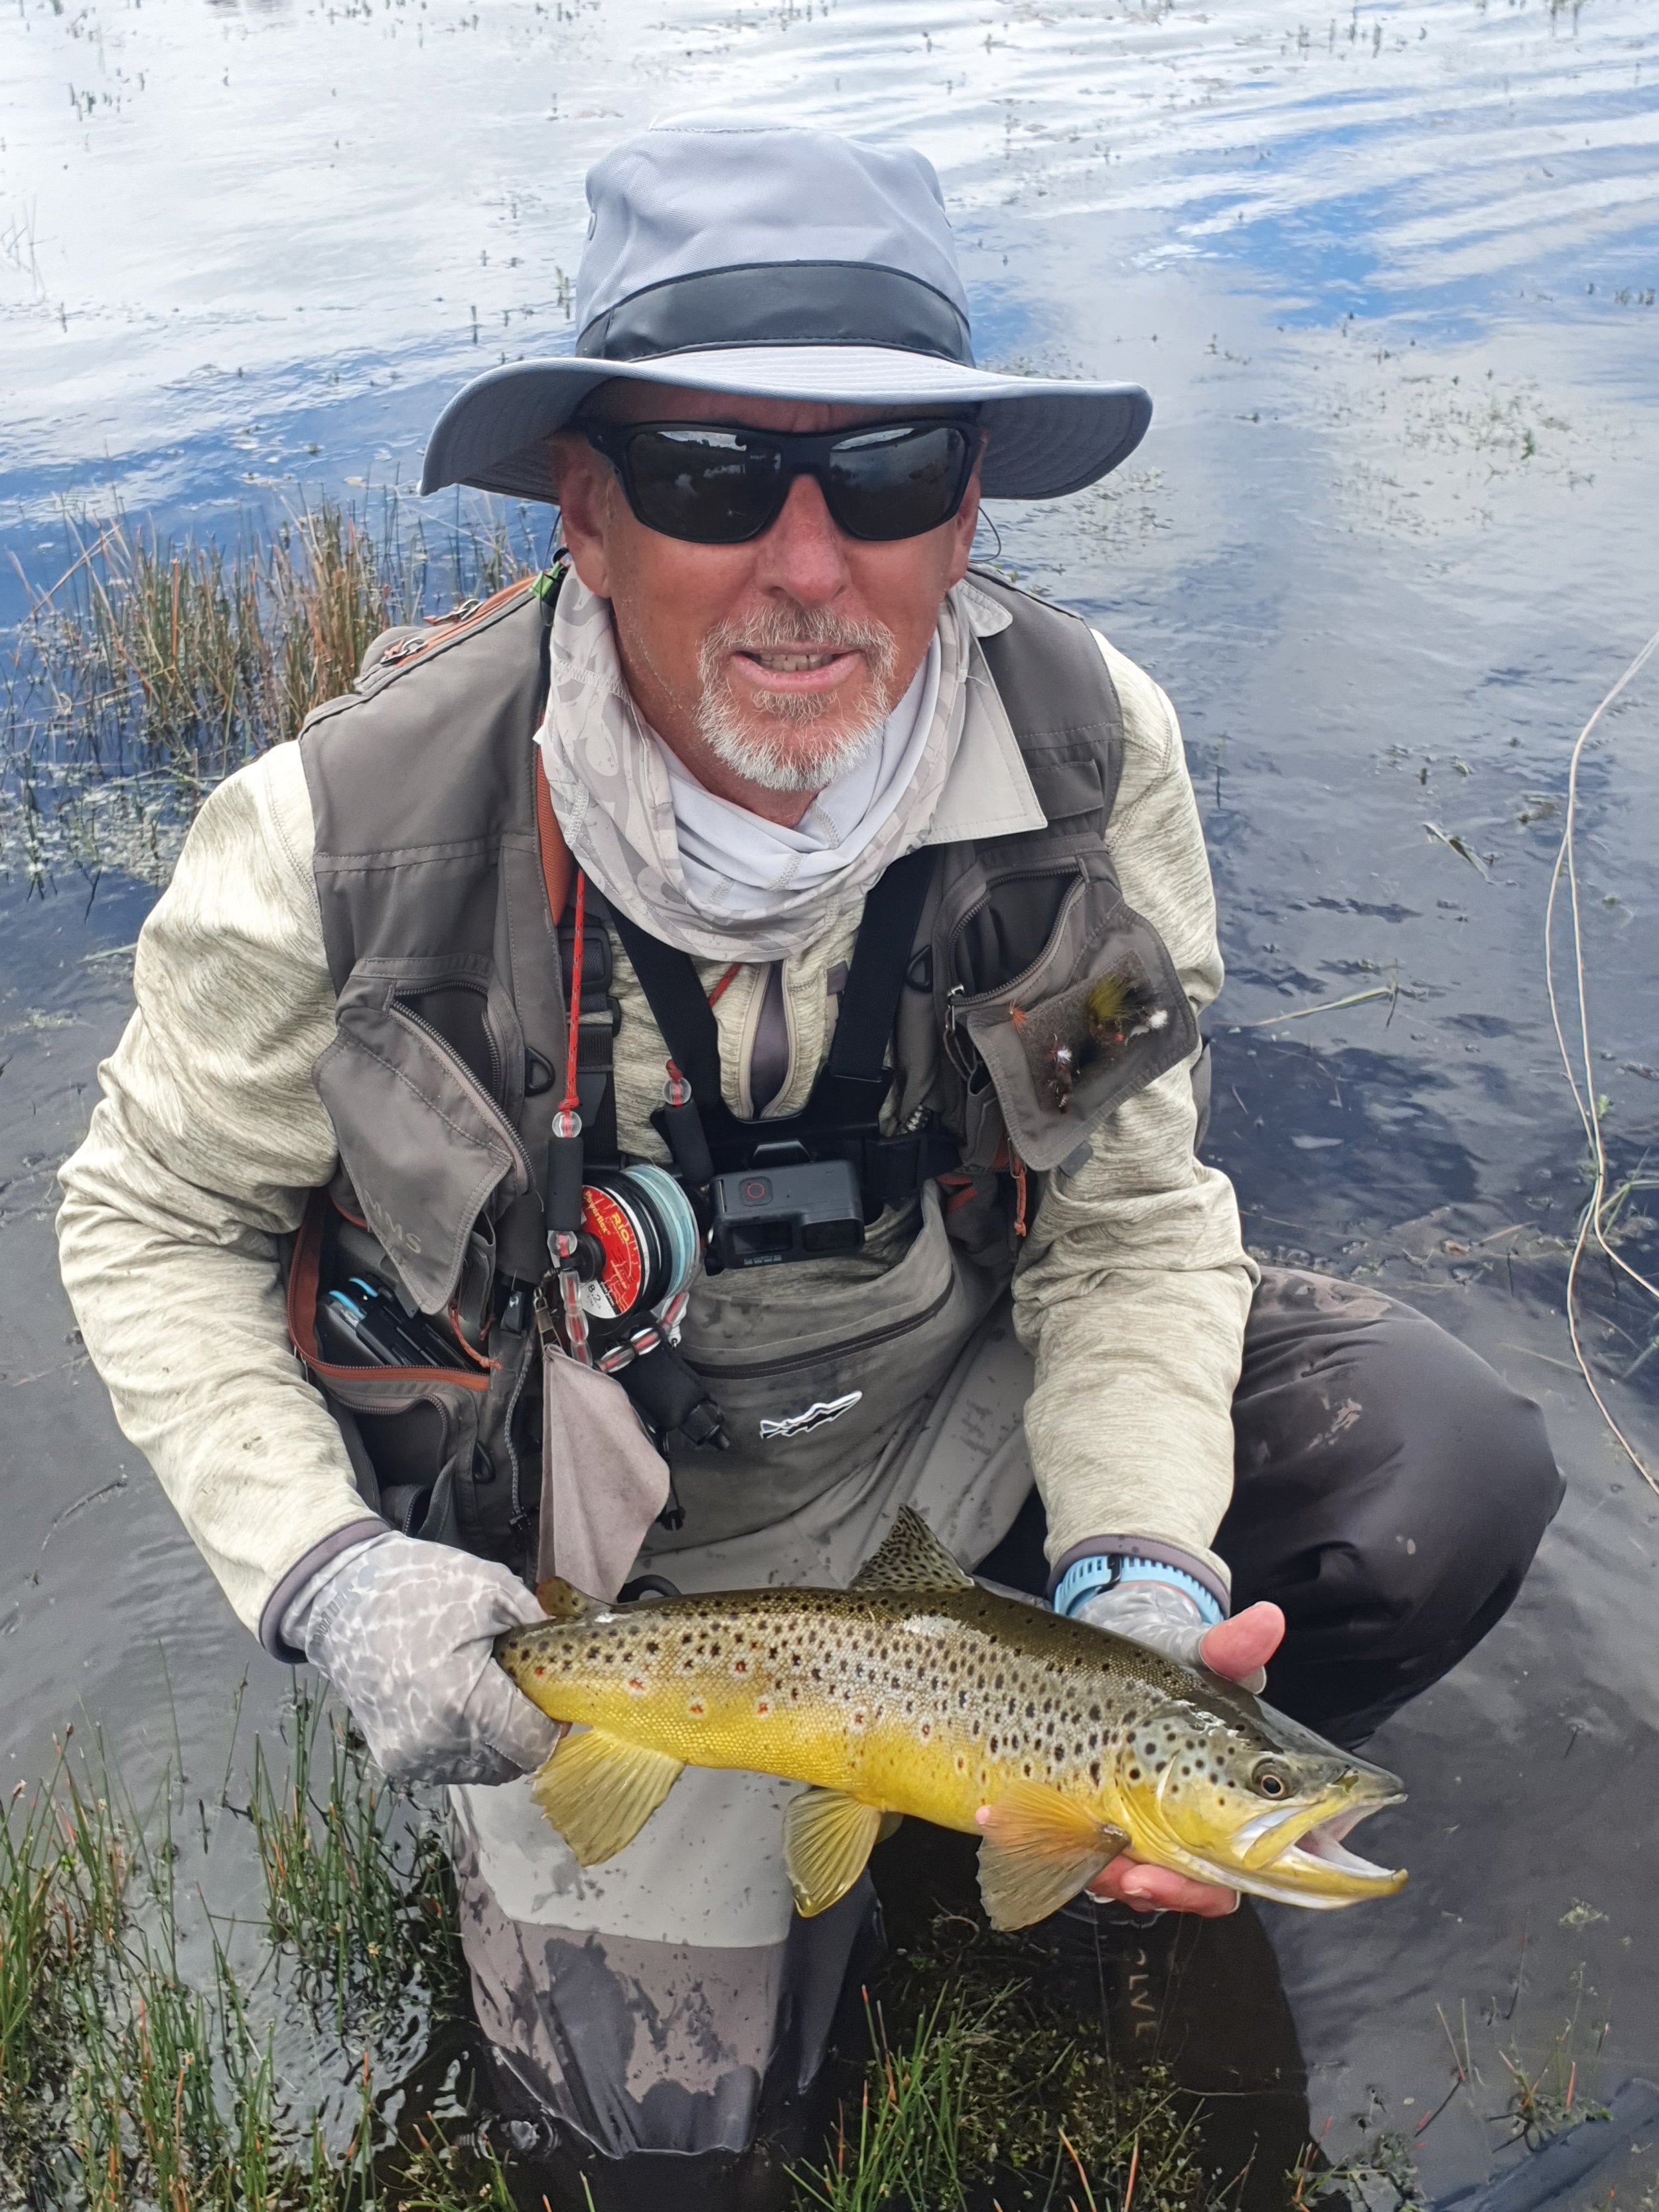 Highland Fly Guide — Fly fishing guide Tasmania - The Highland Fly